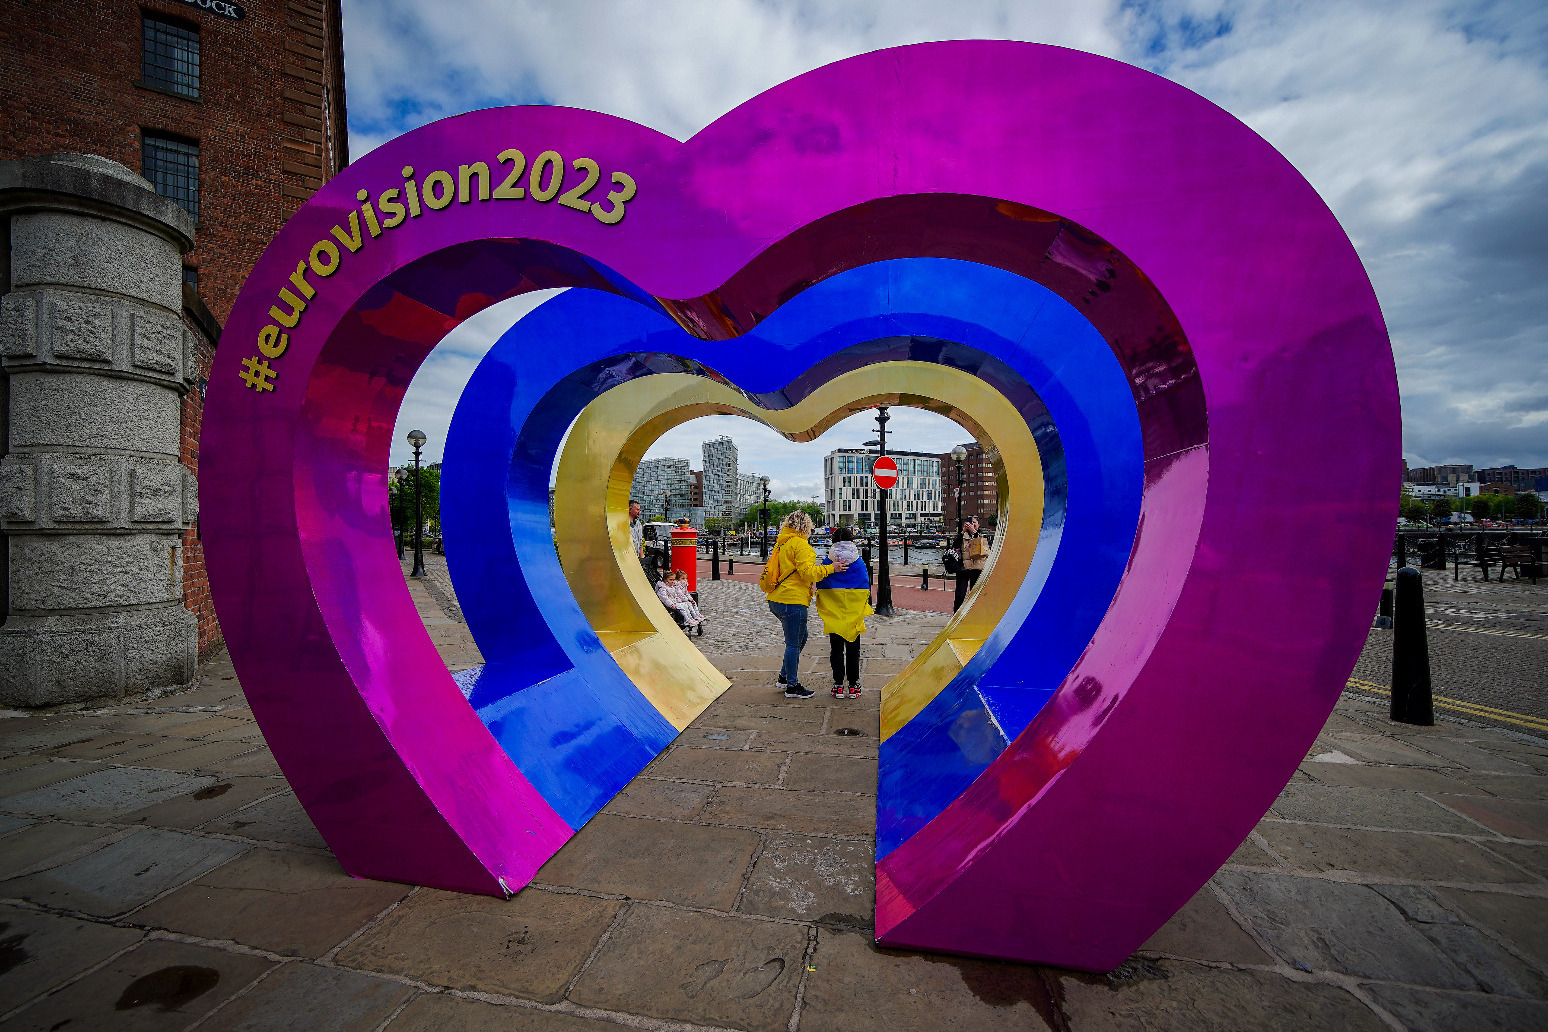 Eurovision brought £54m boost to Liverpool 